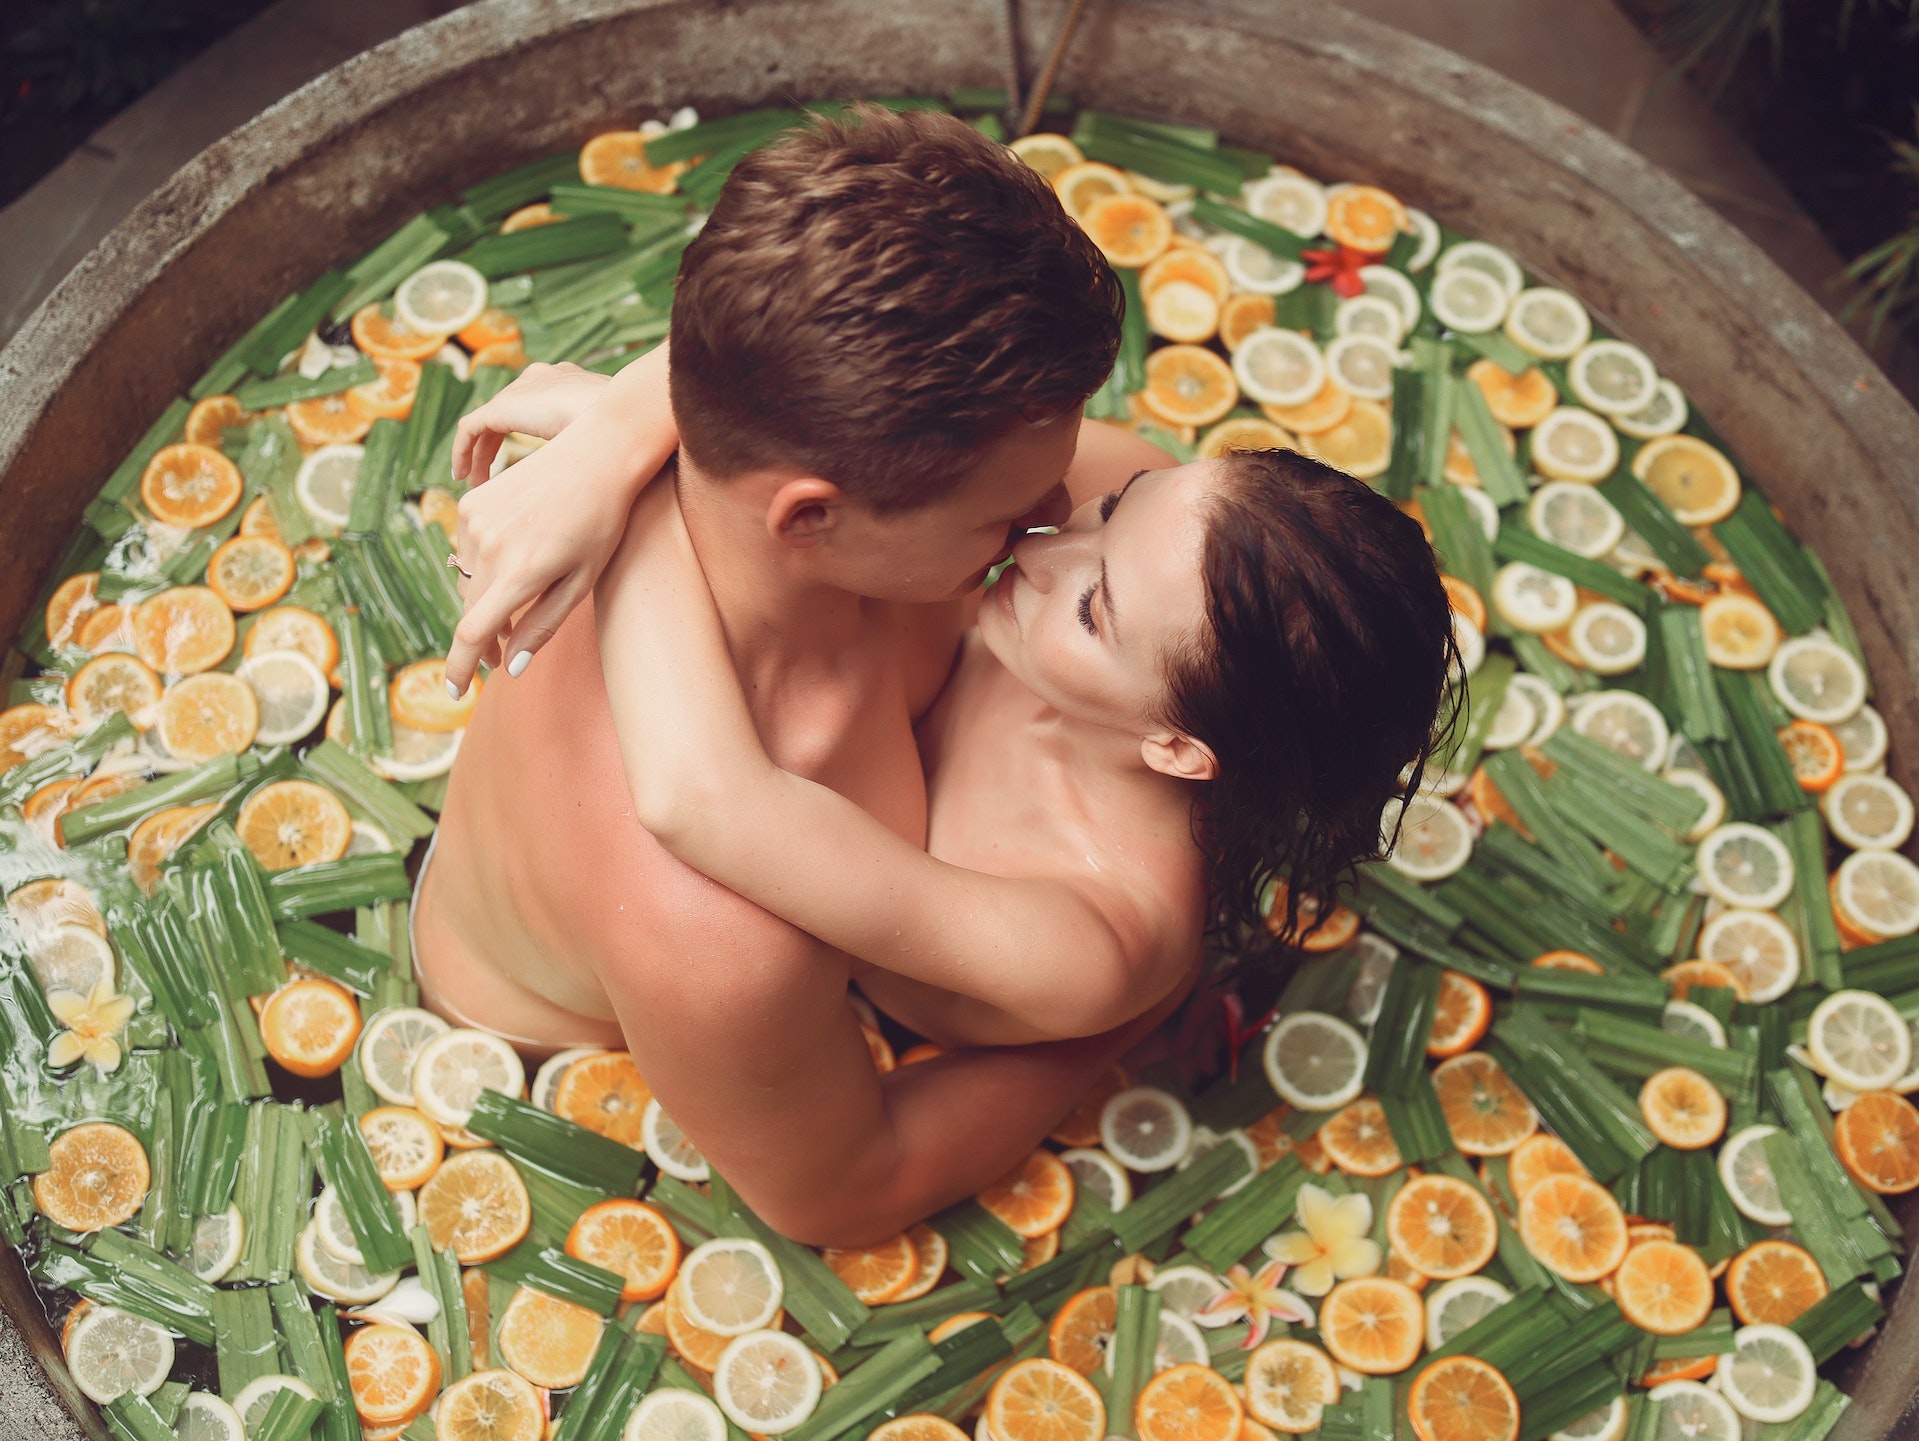 A man and a woman having a sexual encounter in a bath tub filled with sliced fruits